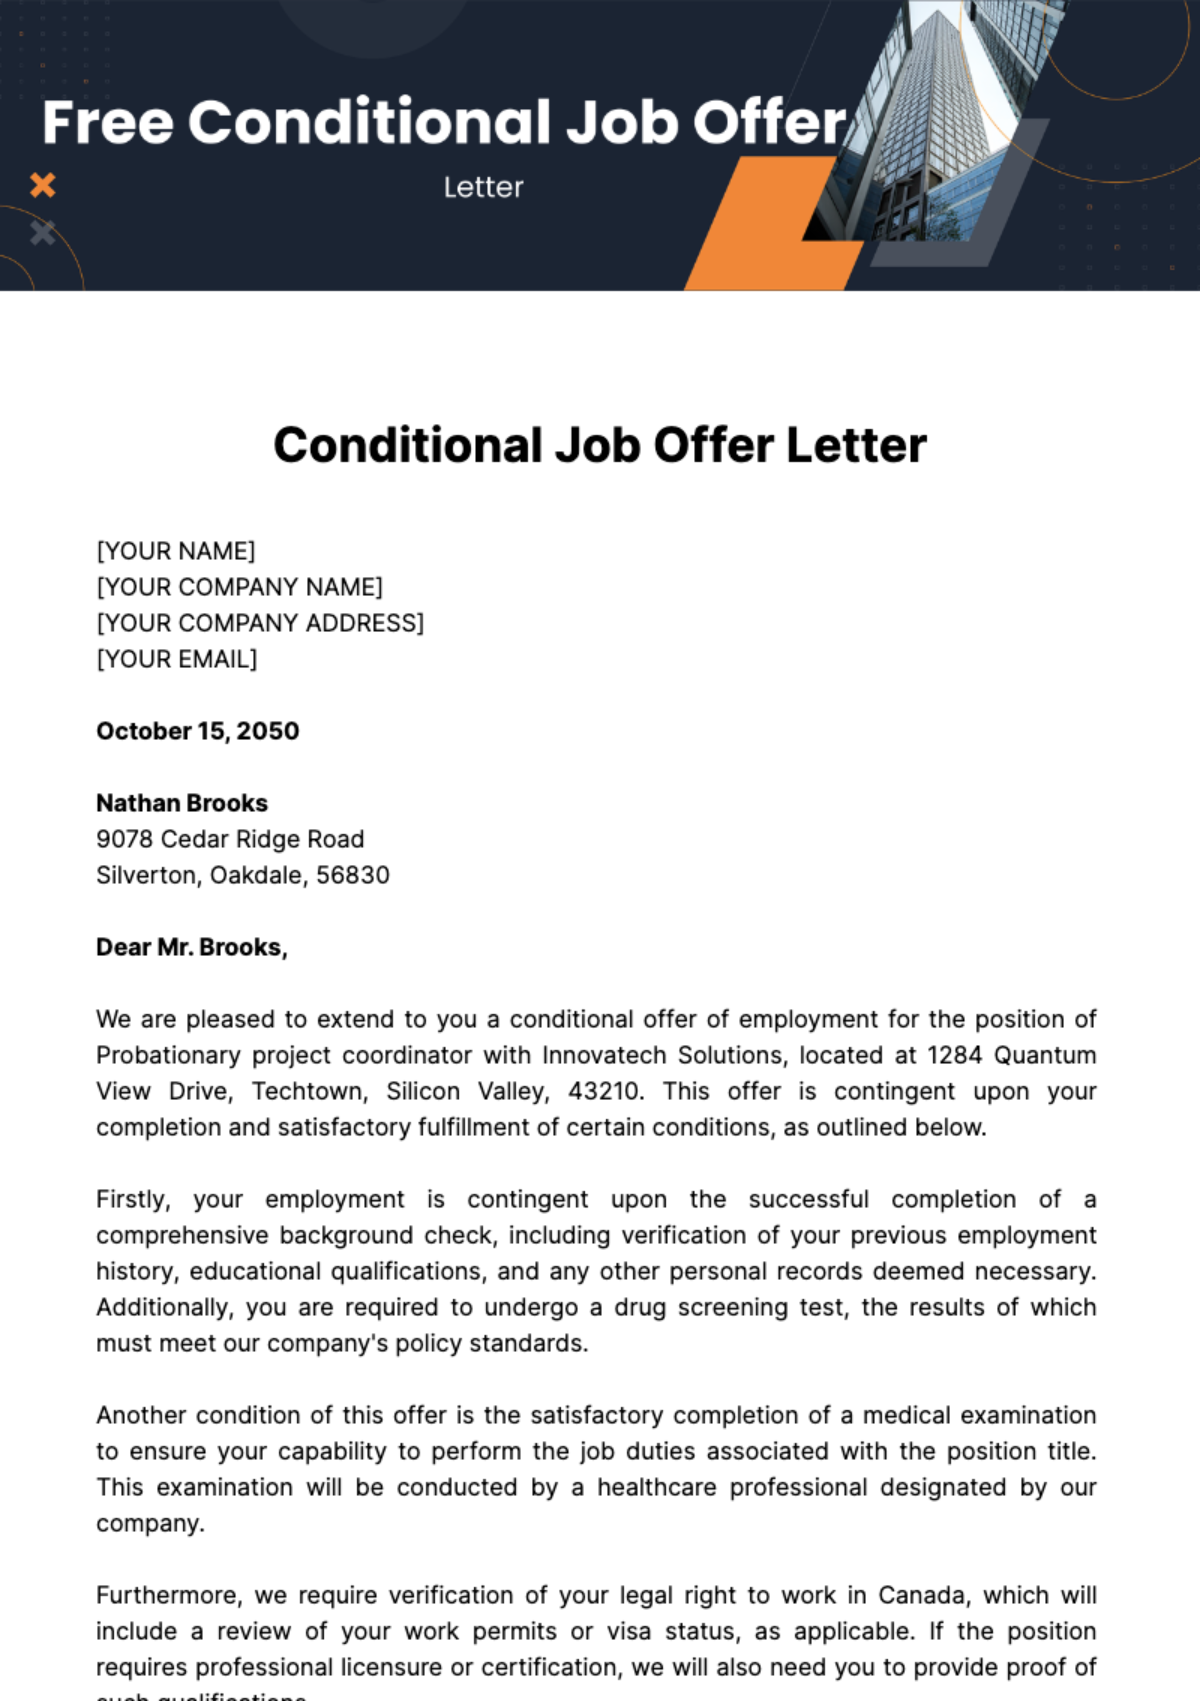 Free Conditional Job Offer Letter Template